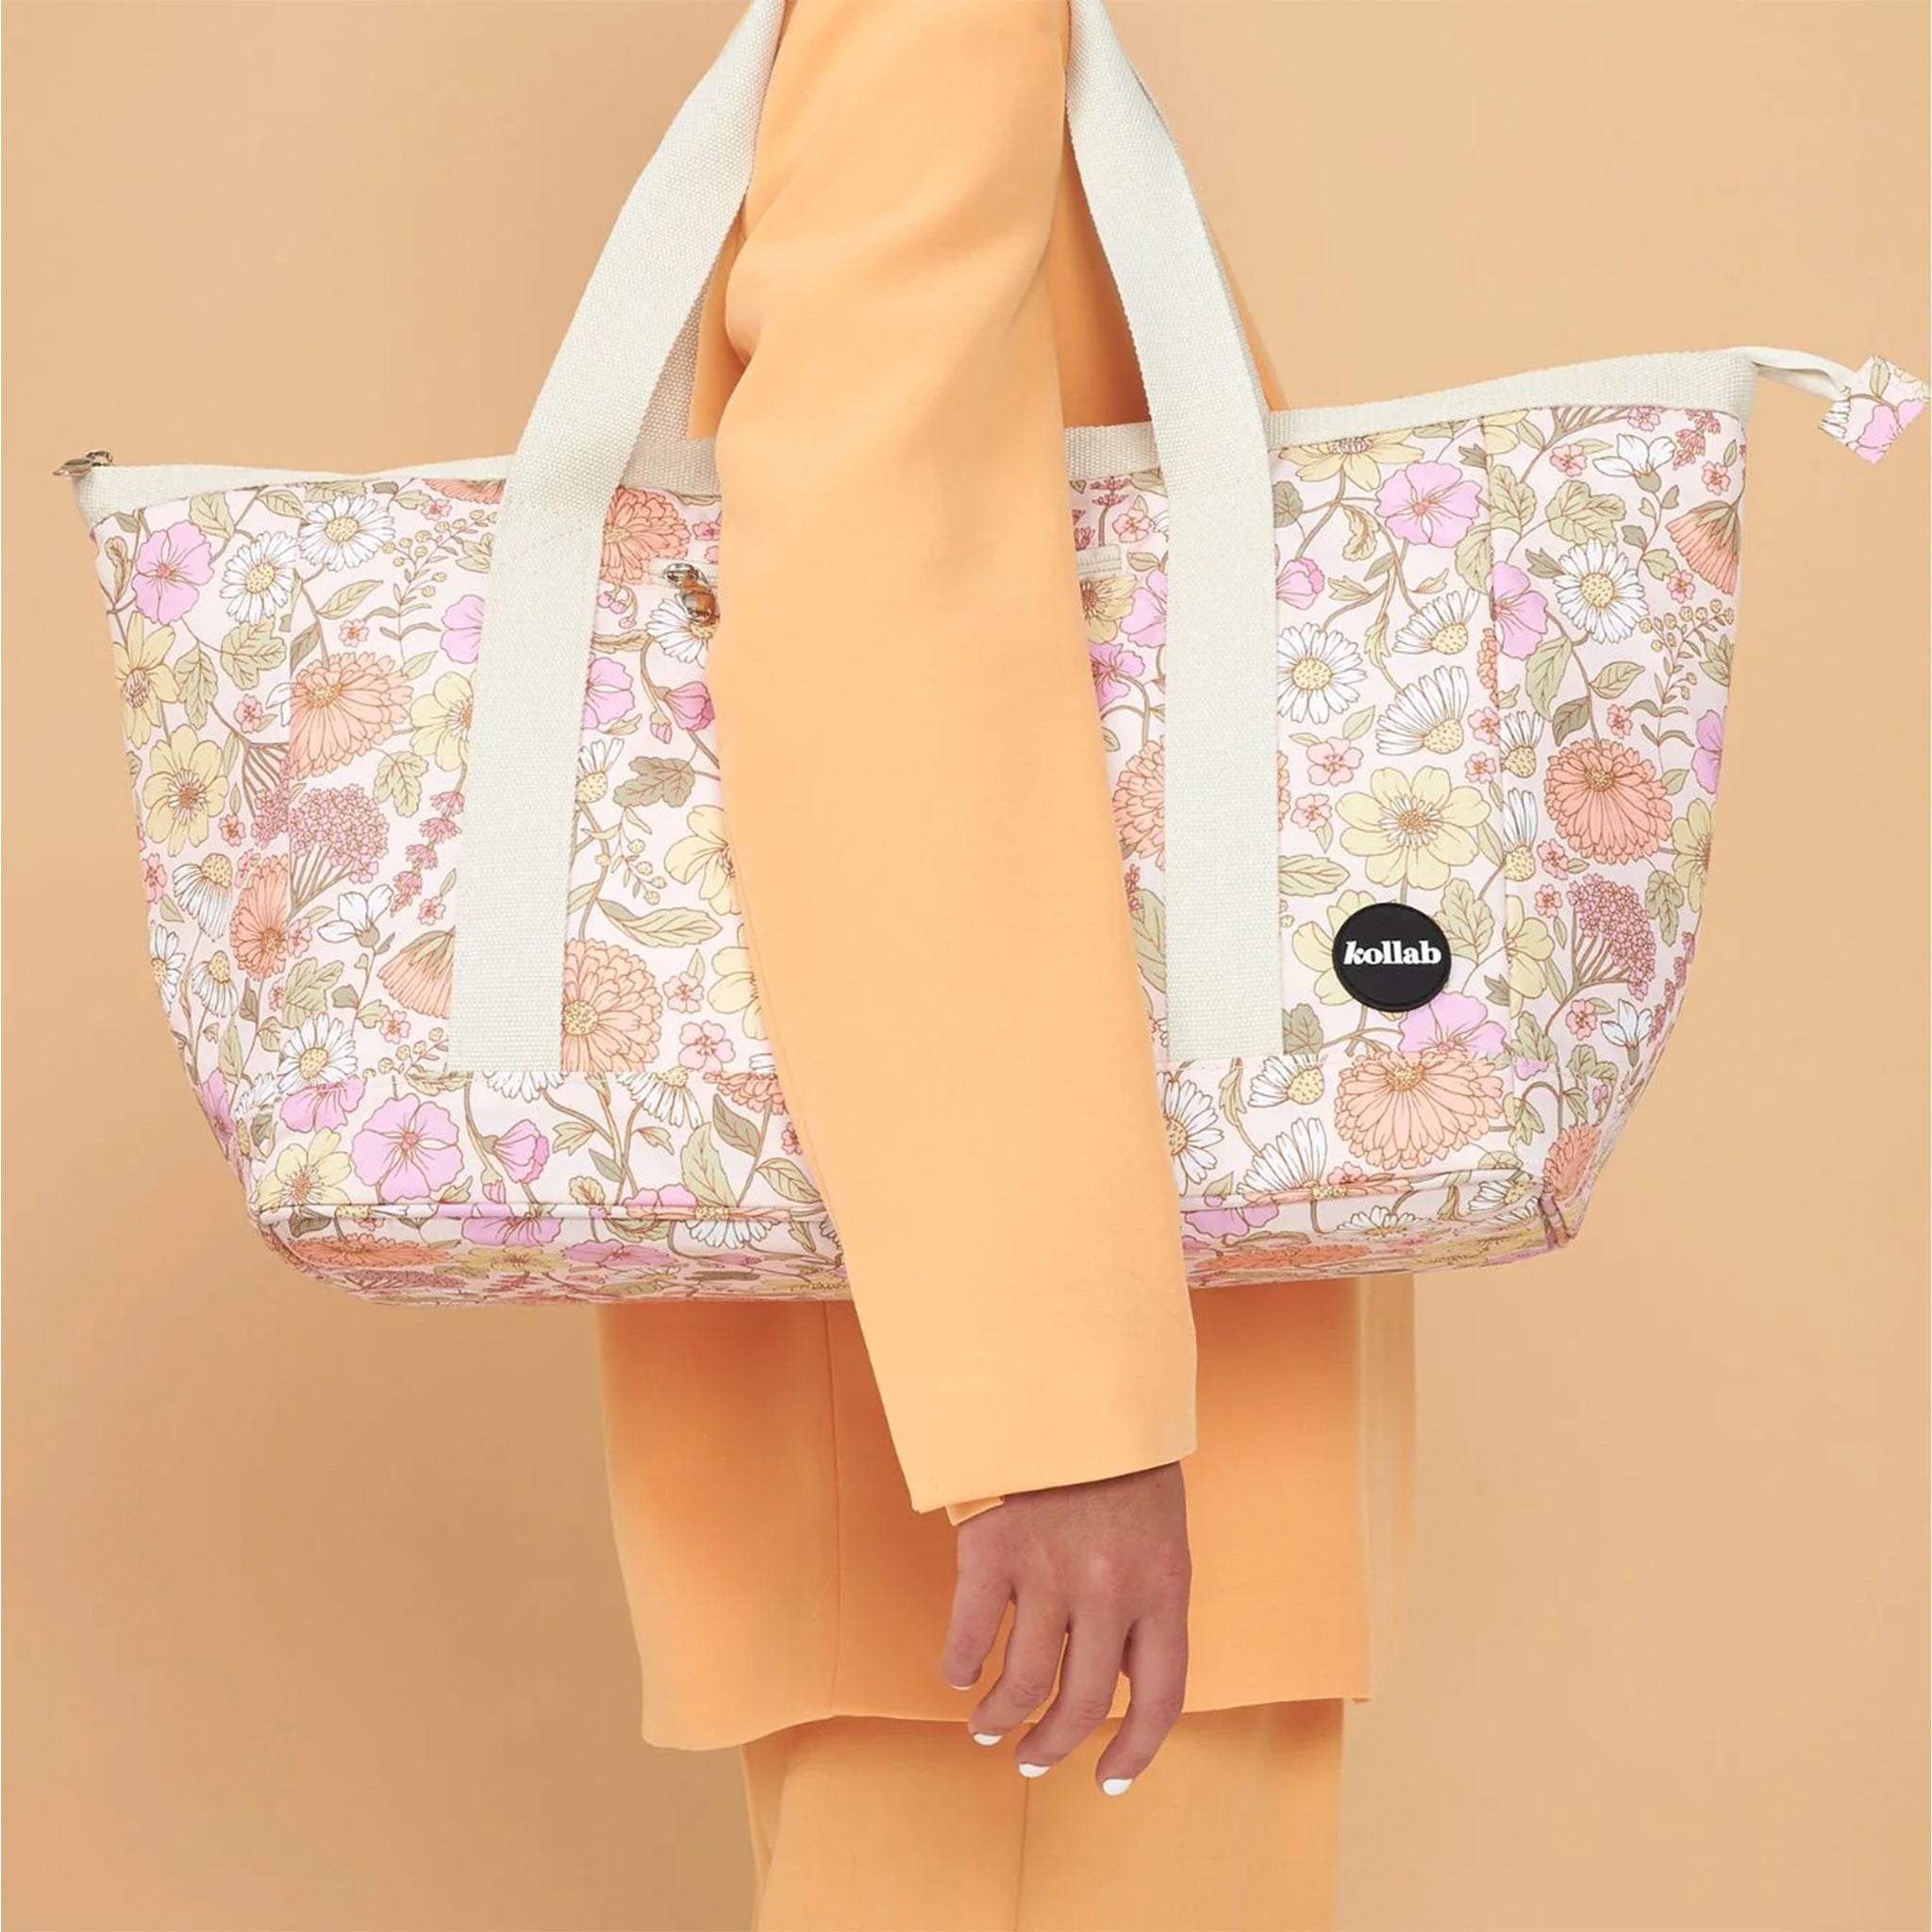 On an orange background is a floral printed tote bag with an ivory strap. 